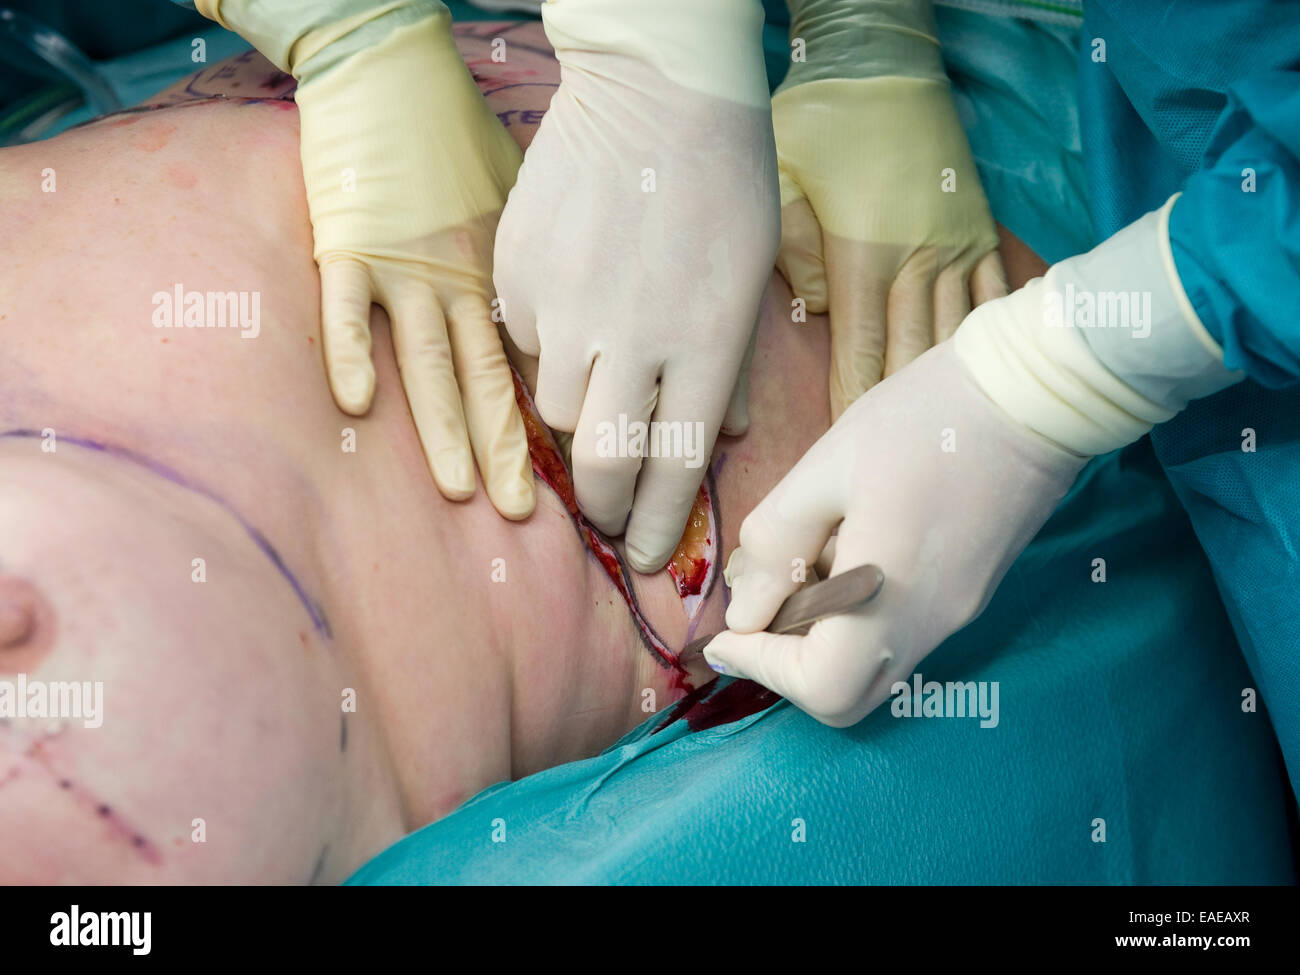 Surgeons are making an incision before they start operation a patient Stock Photo